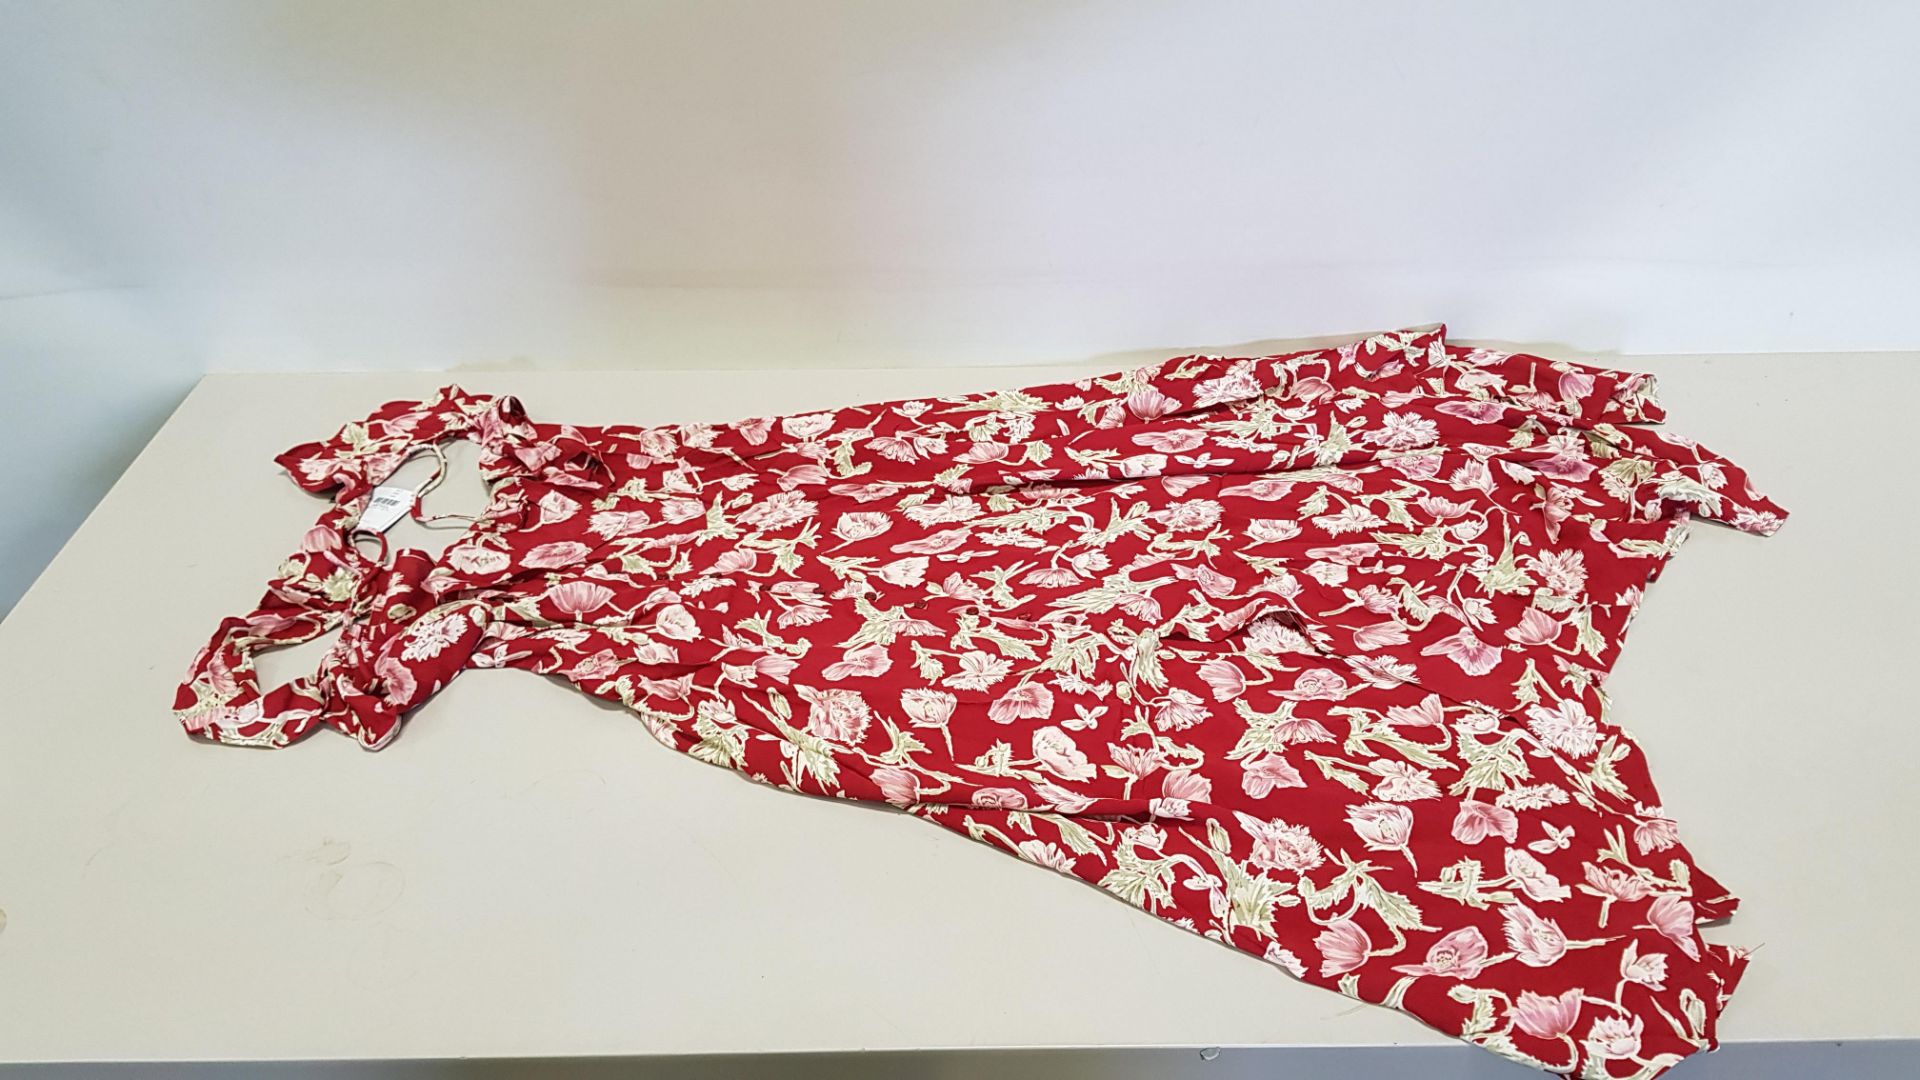 9 X BRAND NEW TOPSHOP RED FLOWER PRINT LONG DRESSES UK SIZE 18 RRP £49.00 (TOTAL RRP £441.00)